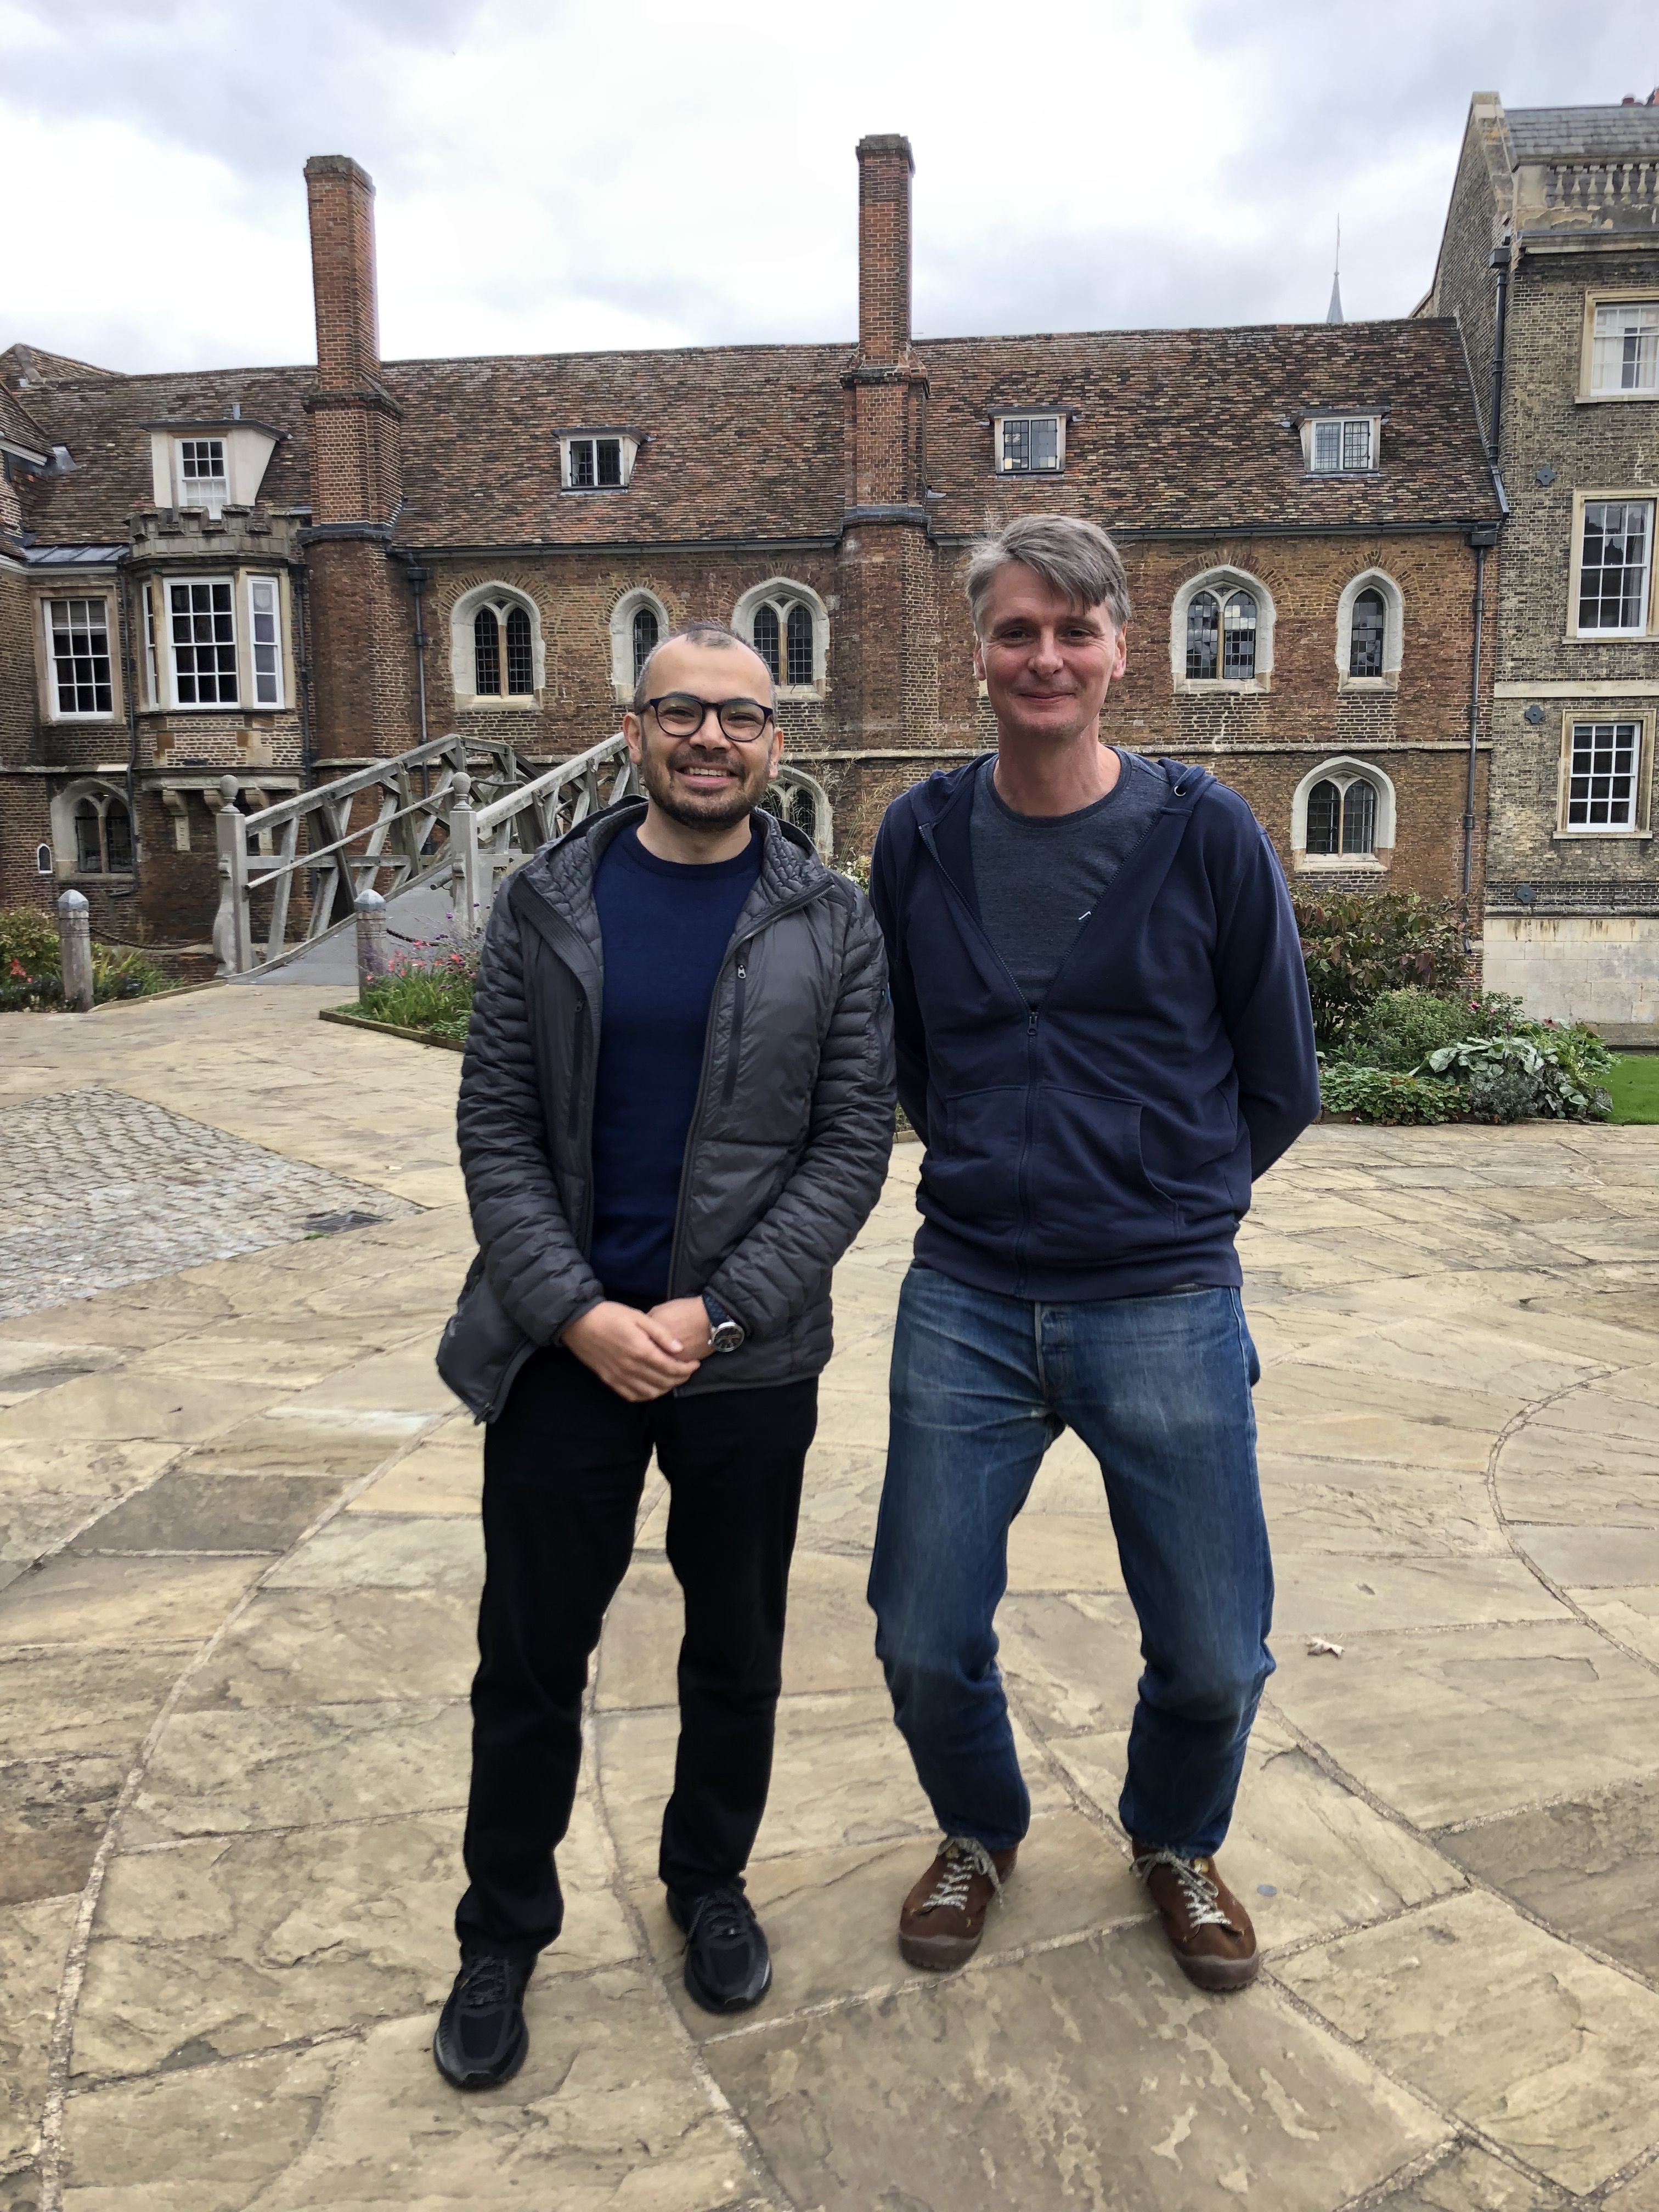 Demis Hassabis and Prof Neil Lawrence